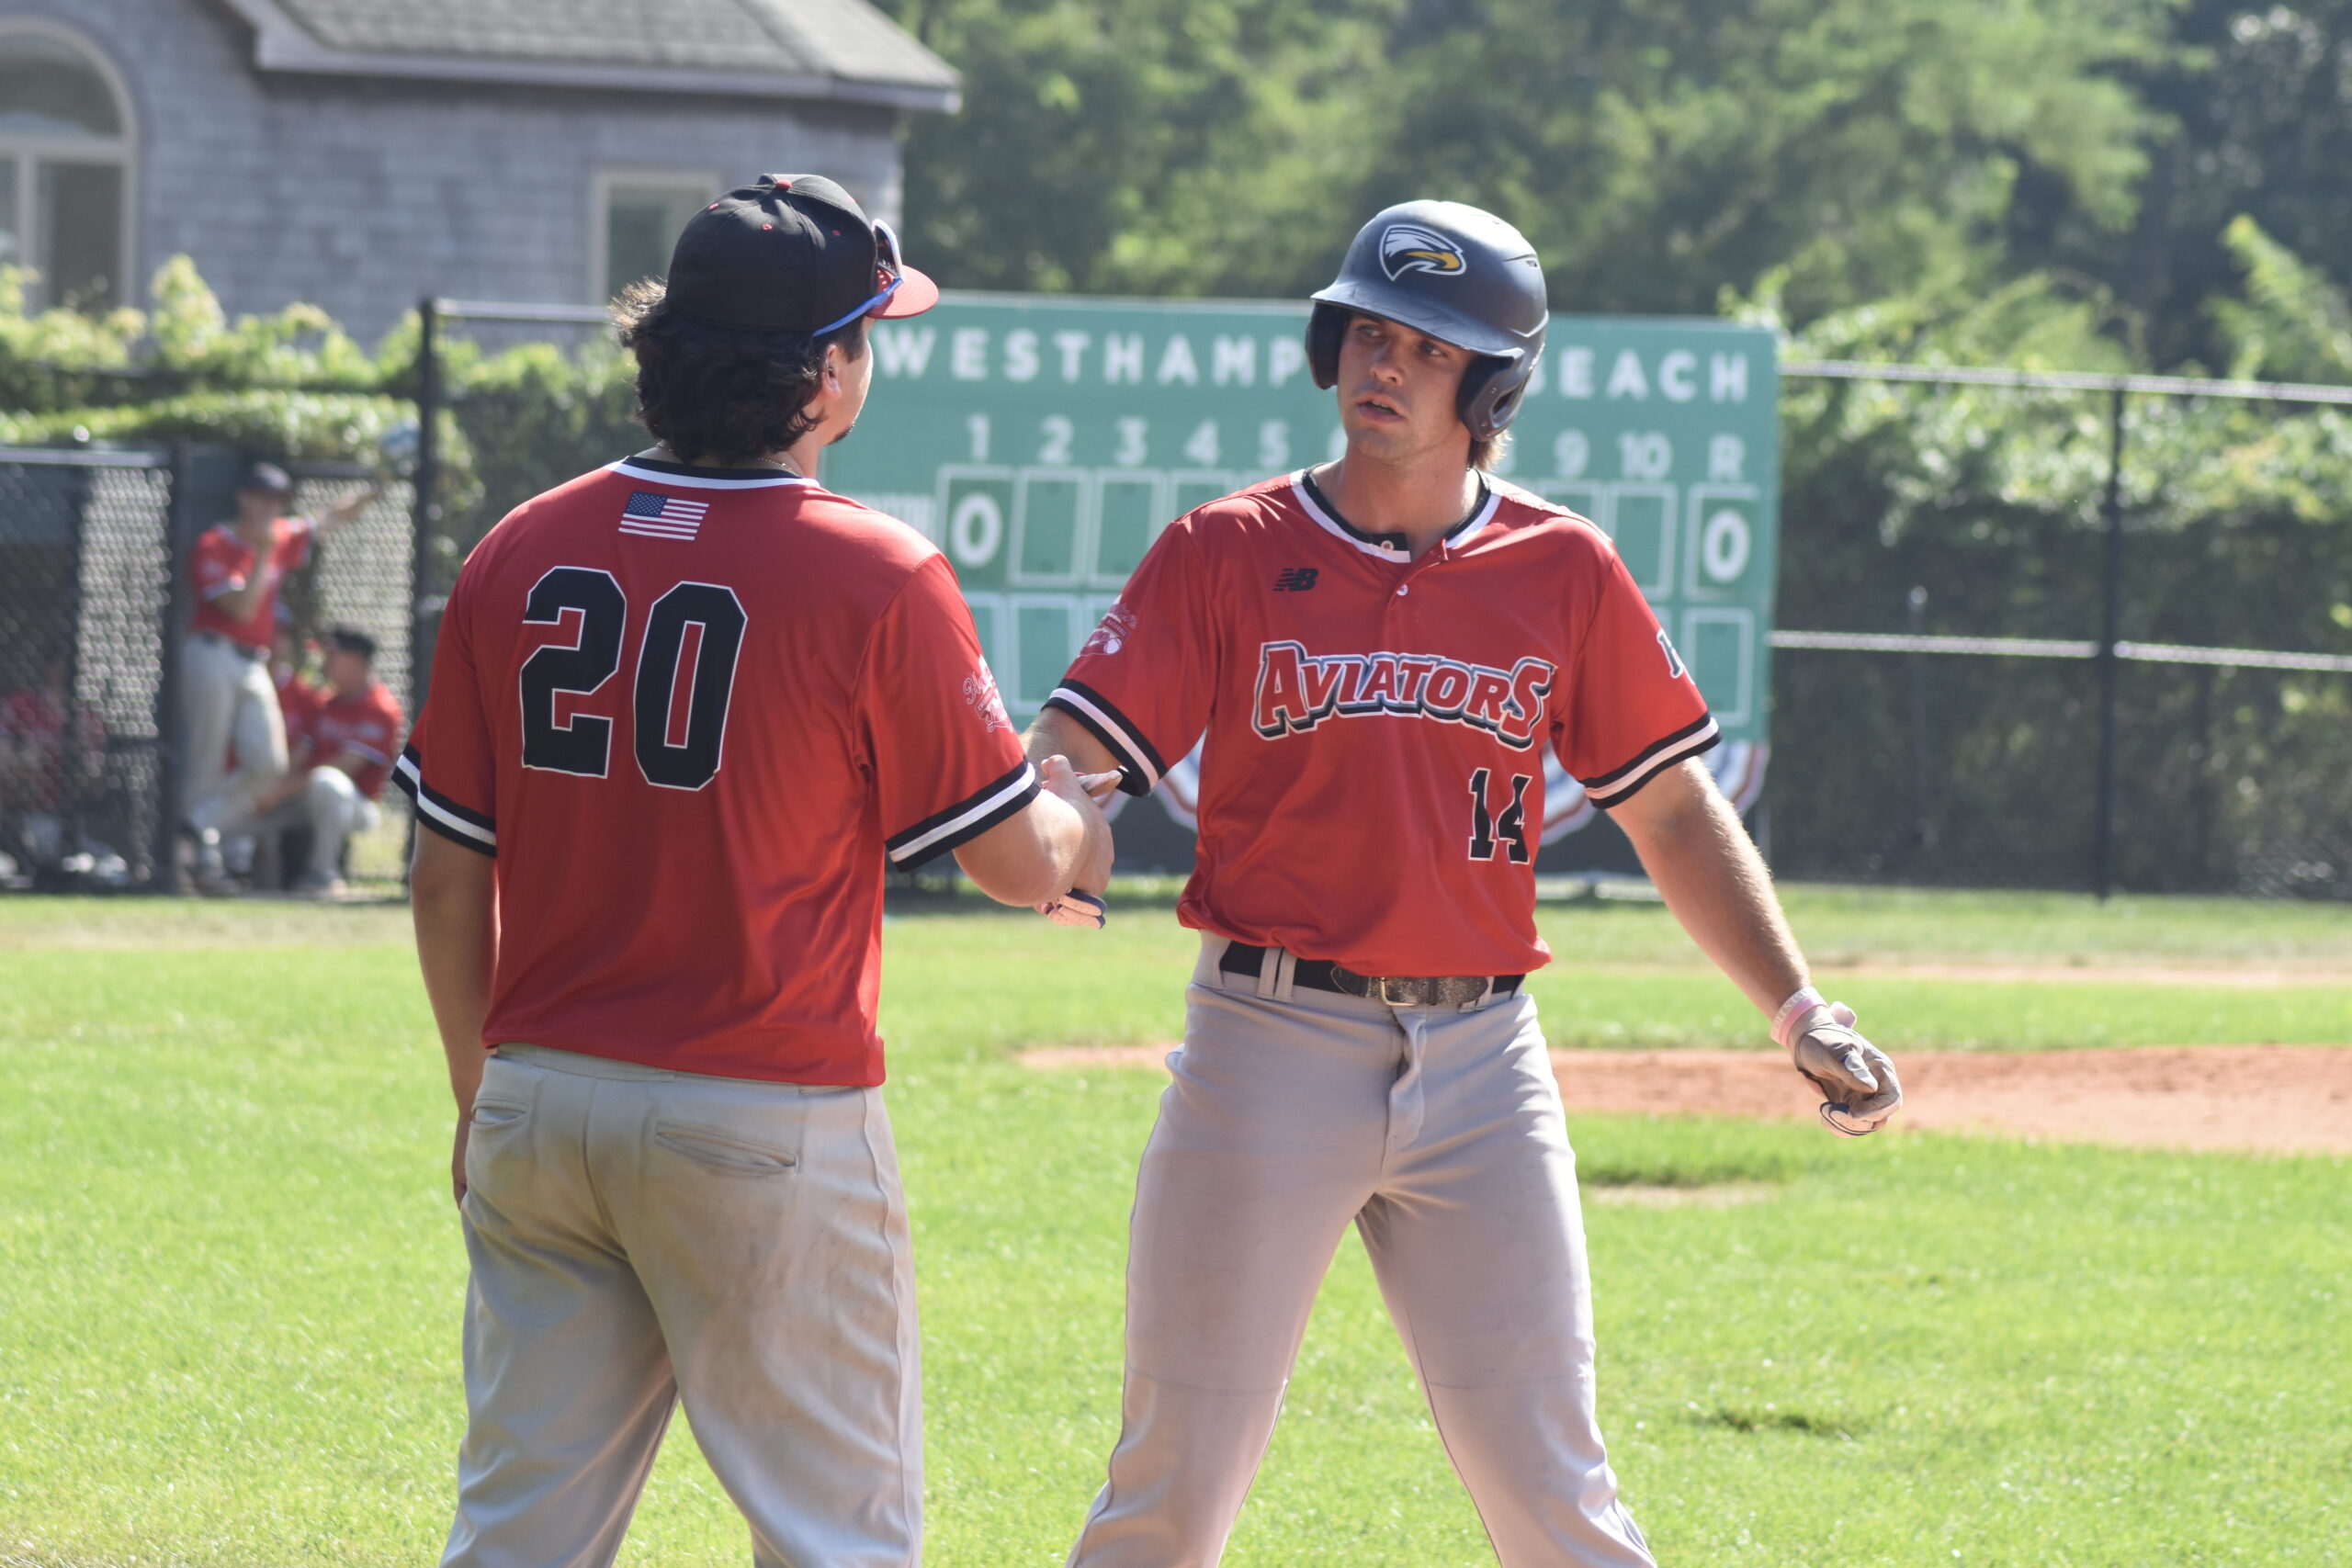 Jack Halloran (Emory) is congratulated by first base coach and teammate Michael DiForte after a base hit.   DREW BUDD